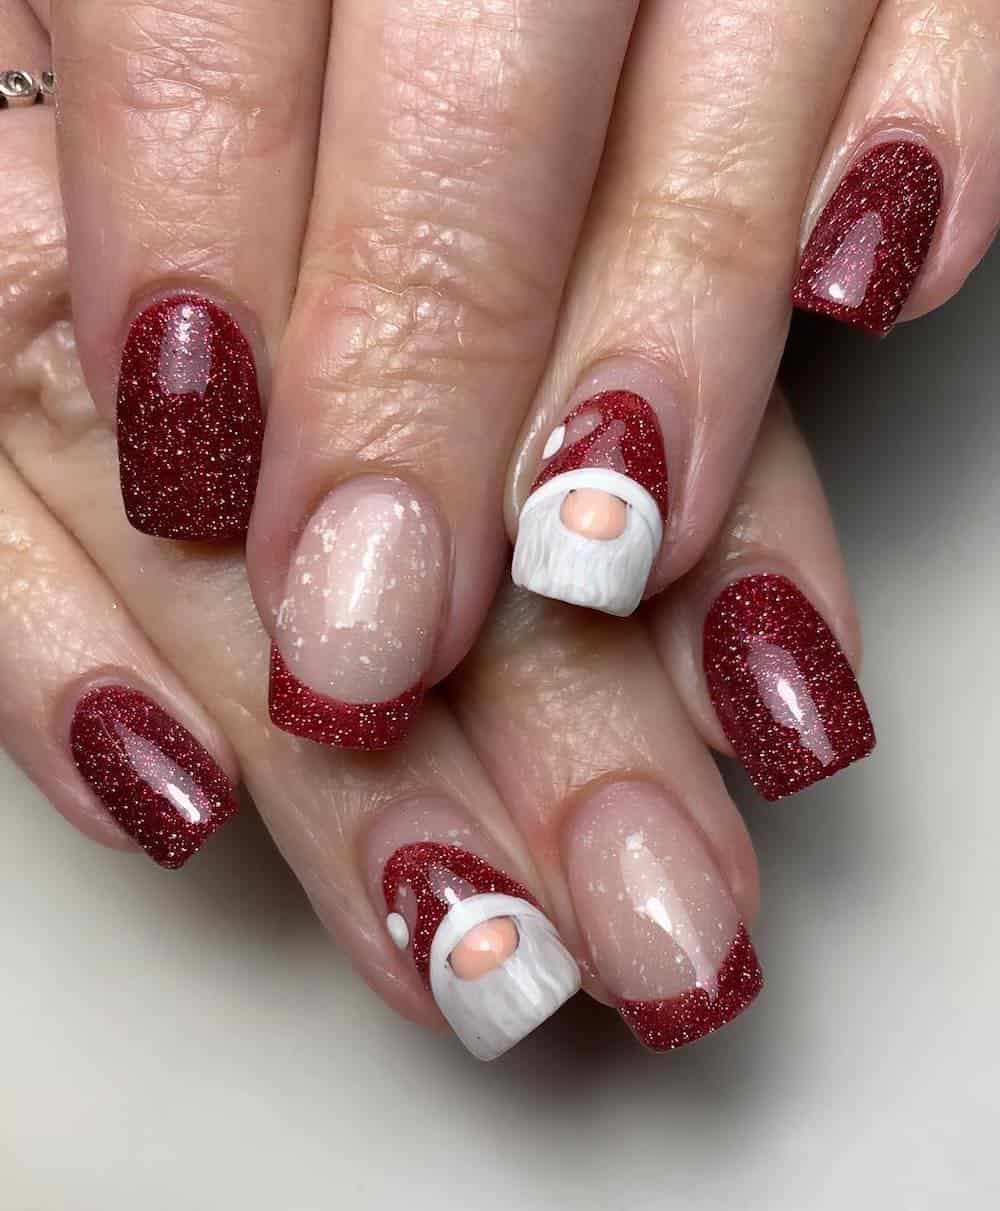 Red glitter french manicure with Santa detail accent nails.